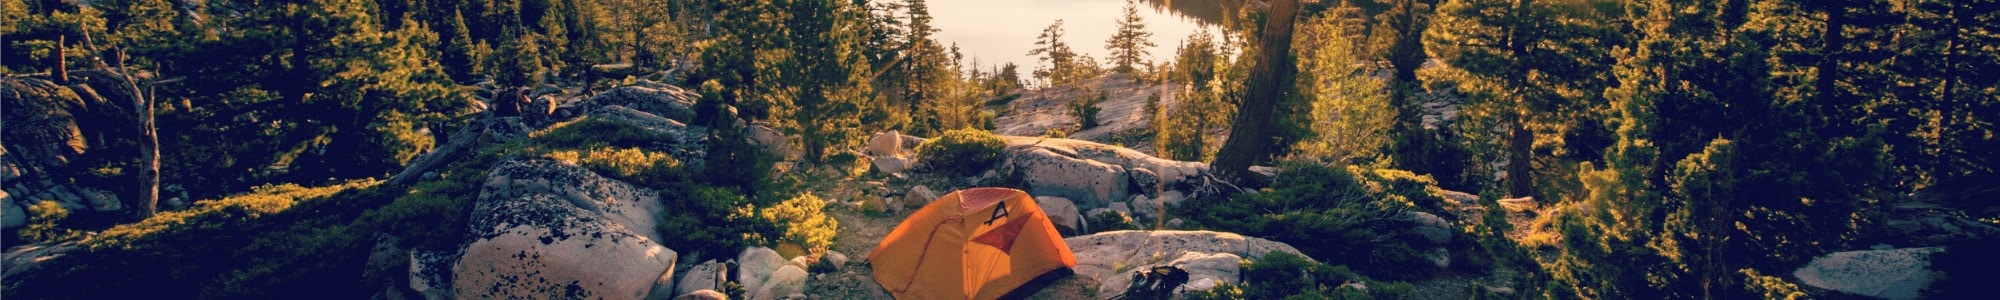 Camping/Dutch Oven banner image